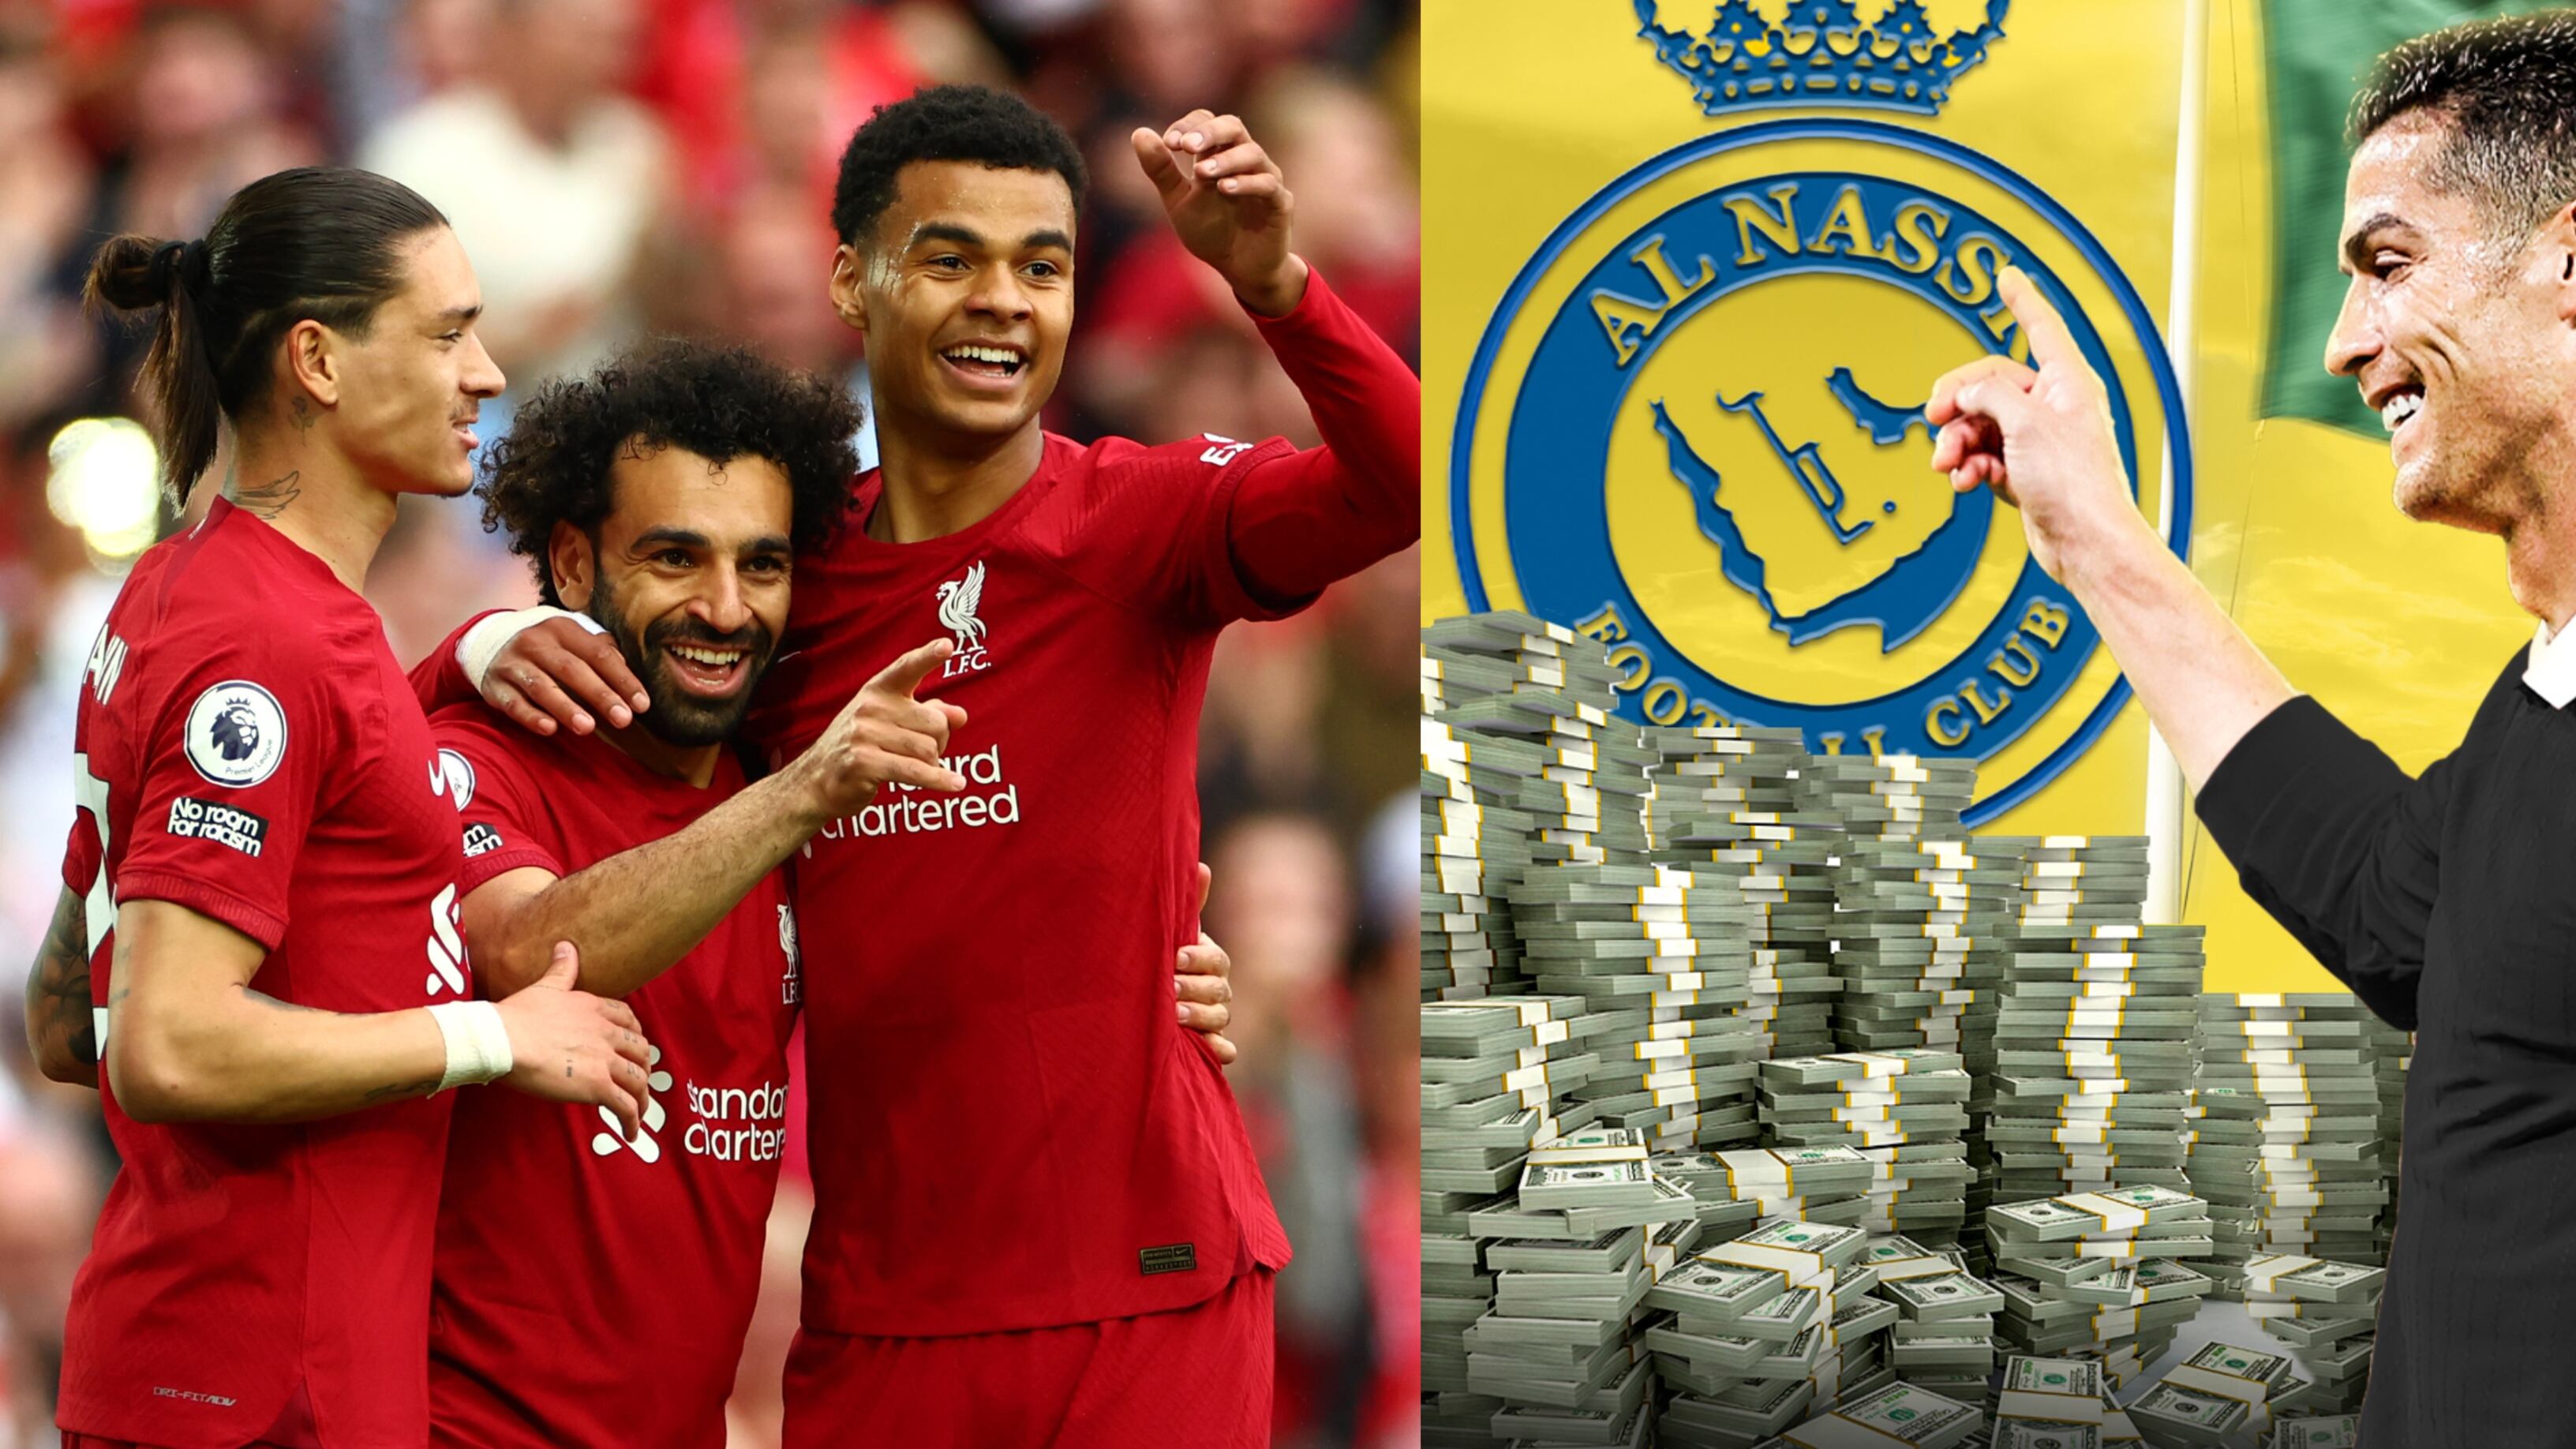 Most expensive sale of all time? Liverpool ace could follow Cristiano for $250m